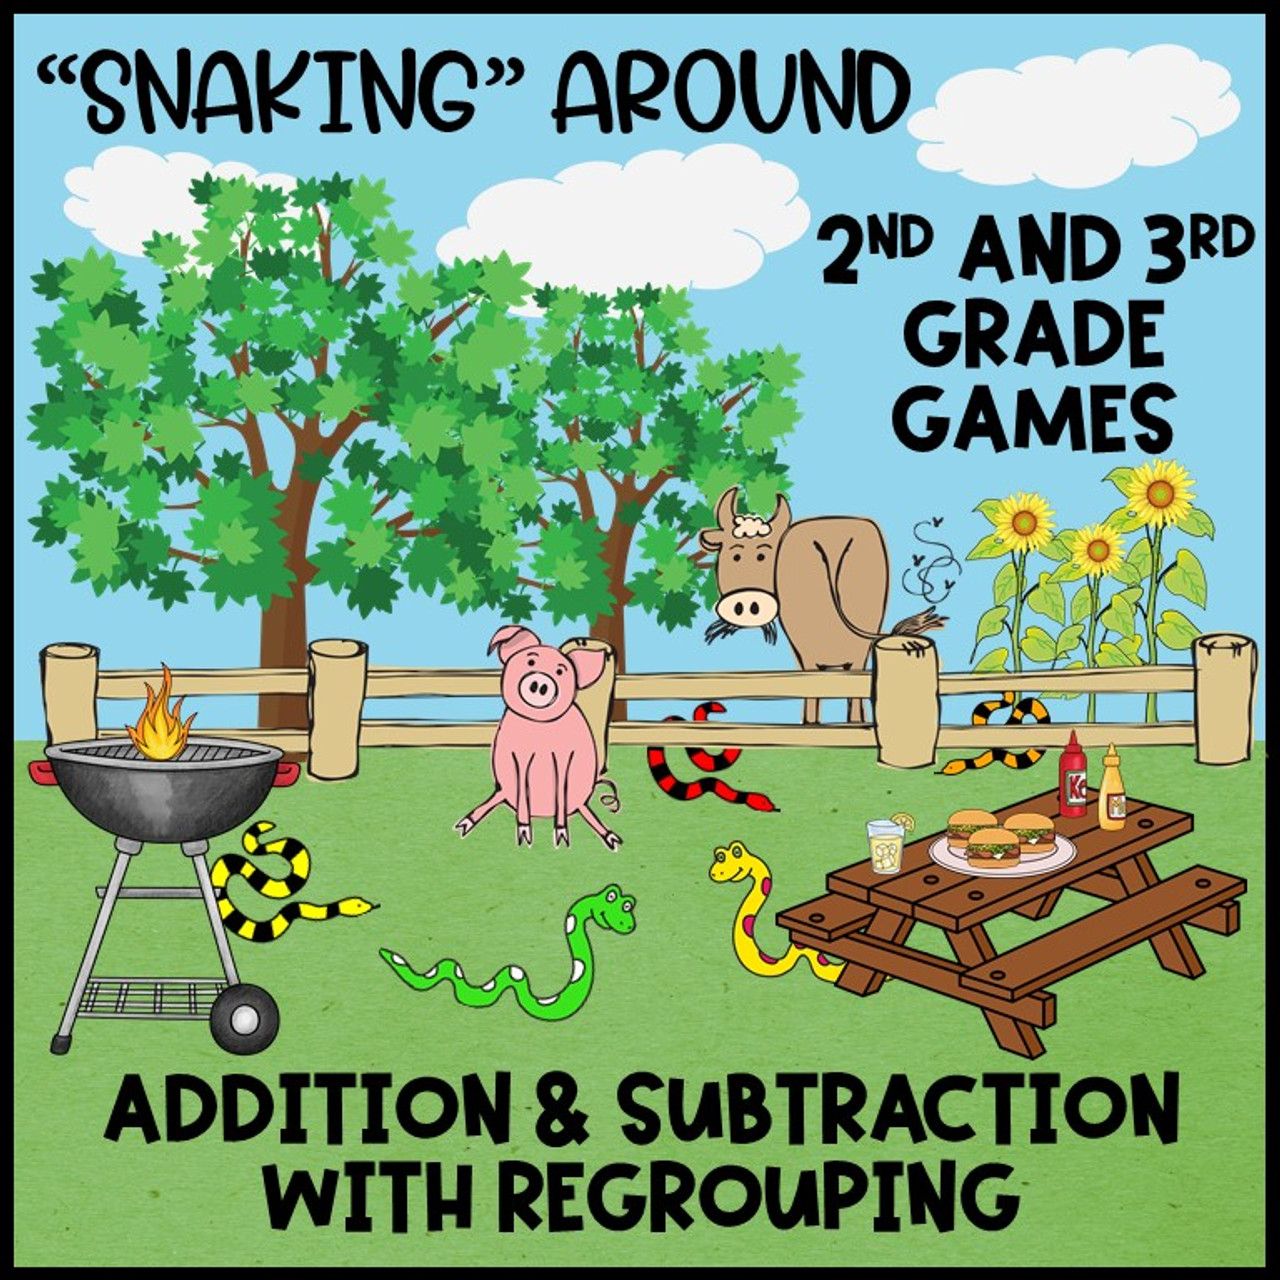 Addition and Subtraction with Regrouping - Games for 2nd and 3rd Grade